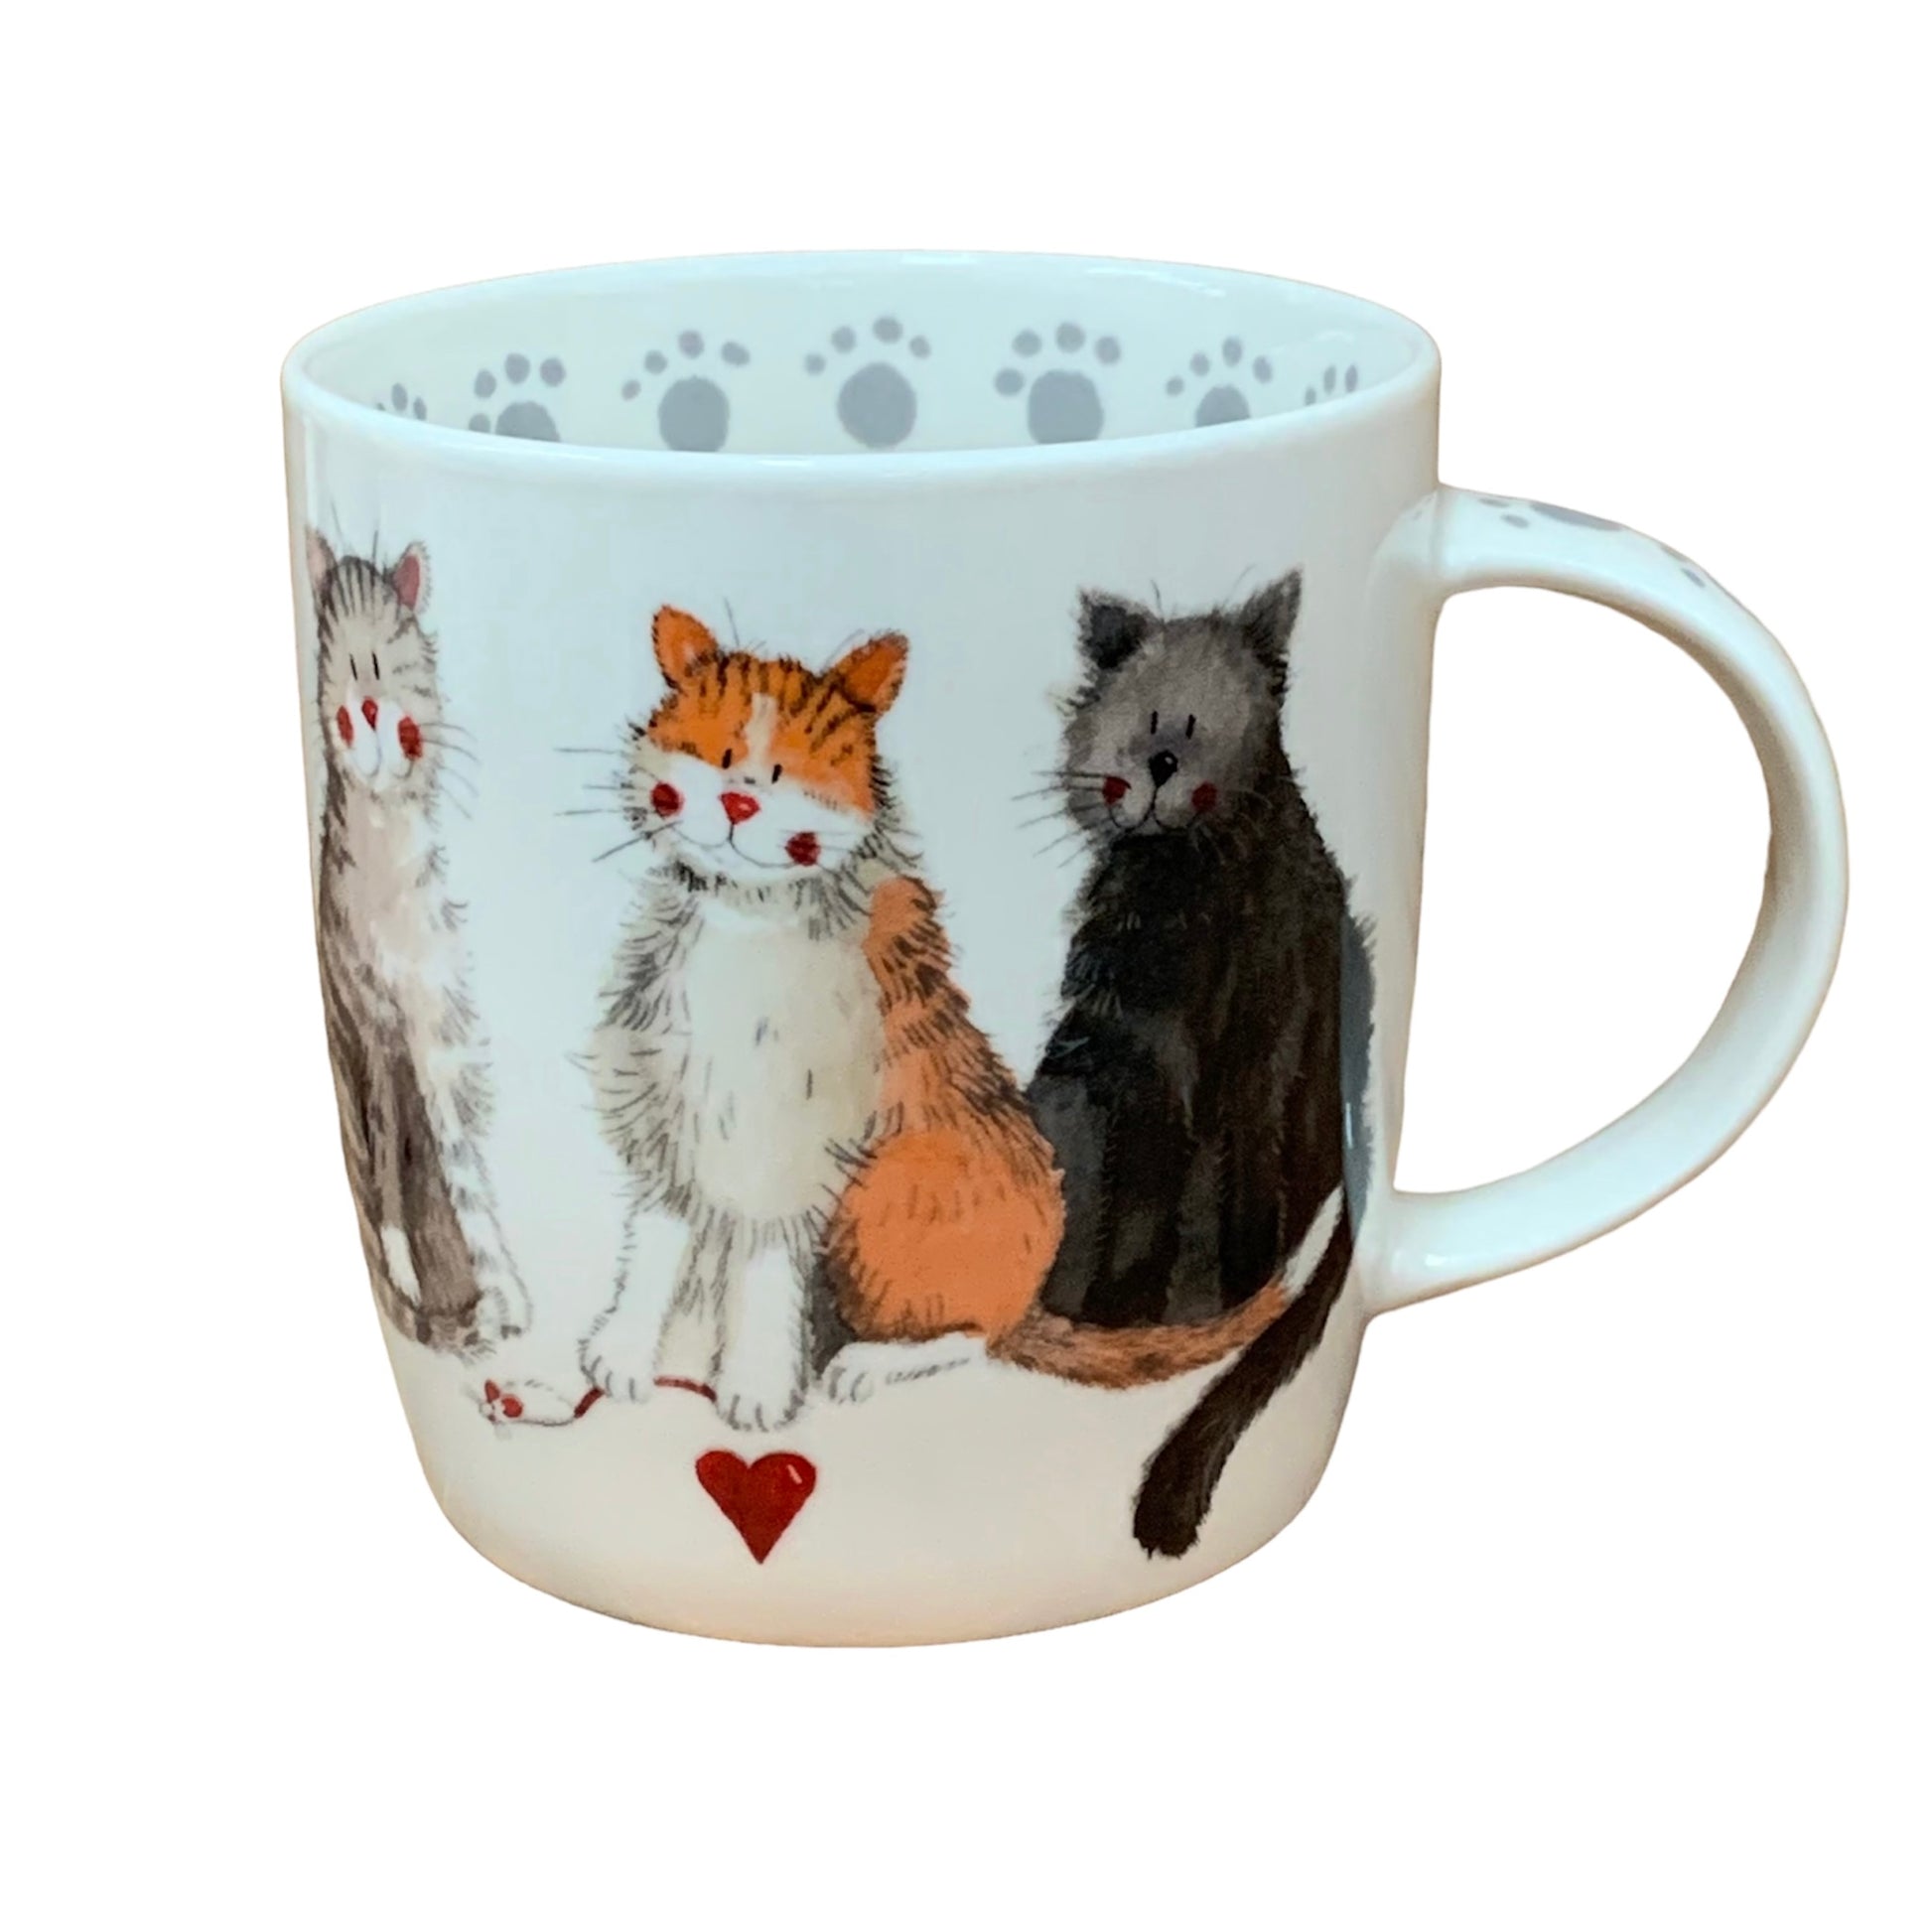 This Alex Clark mug is illustrated with an array of mischievous looking furry cats.  This mug also features cat paw illustrations around the inside rim & down the handle. 